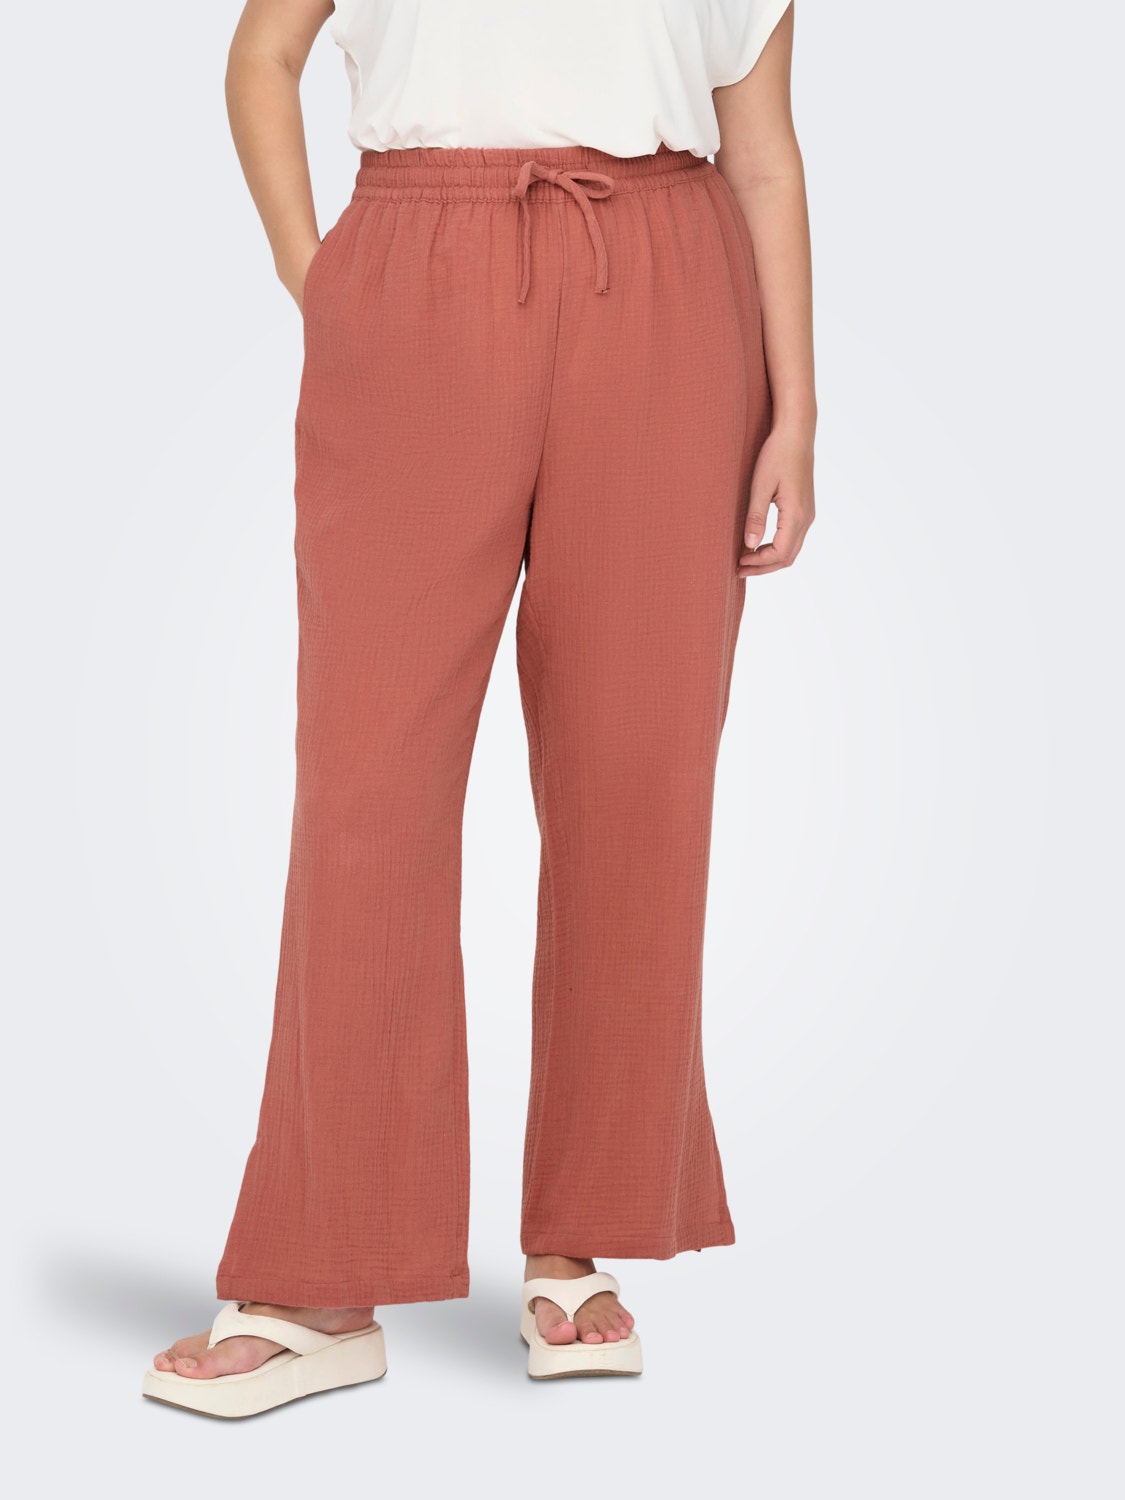 ONLY Loose Fit Side slits Trousers -Canyon Rose - 15296932